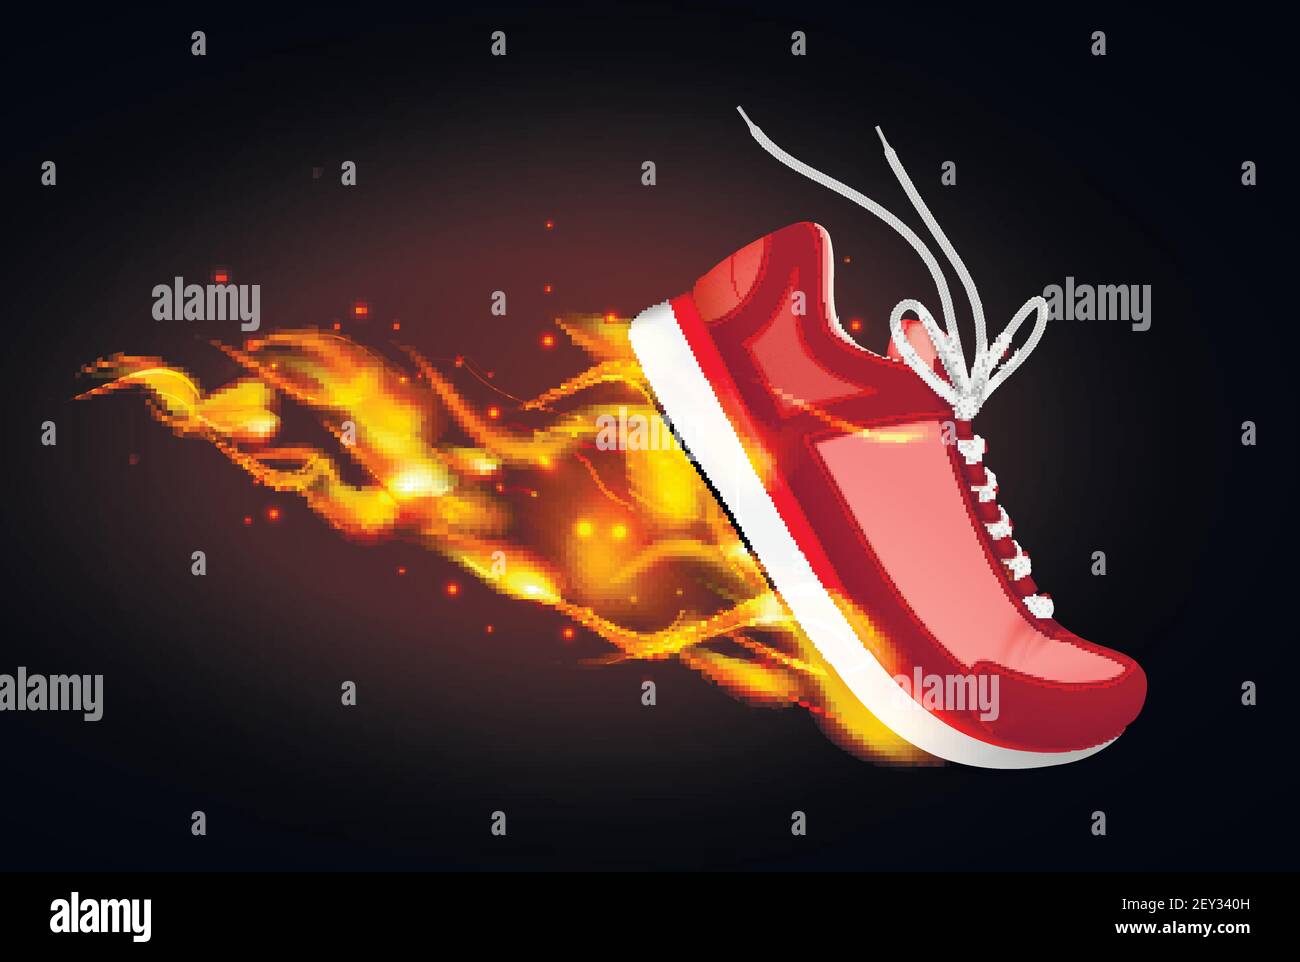 Burning sport shoes realistic vector illustration of red sneaker in dynamics with fire from under sole Stock Vector